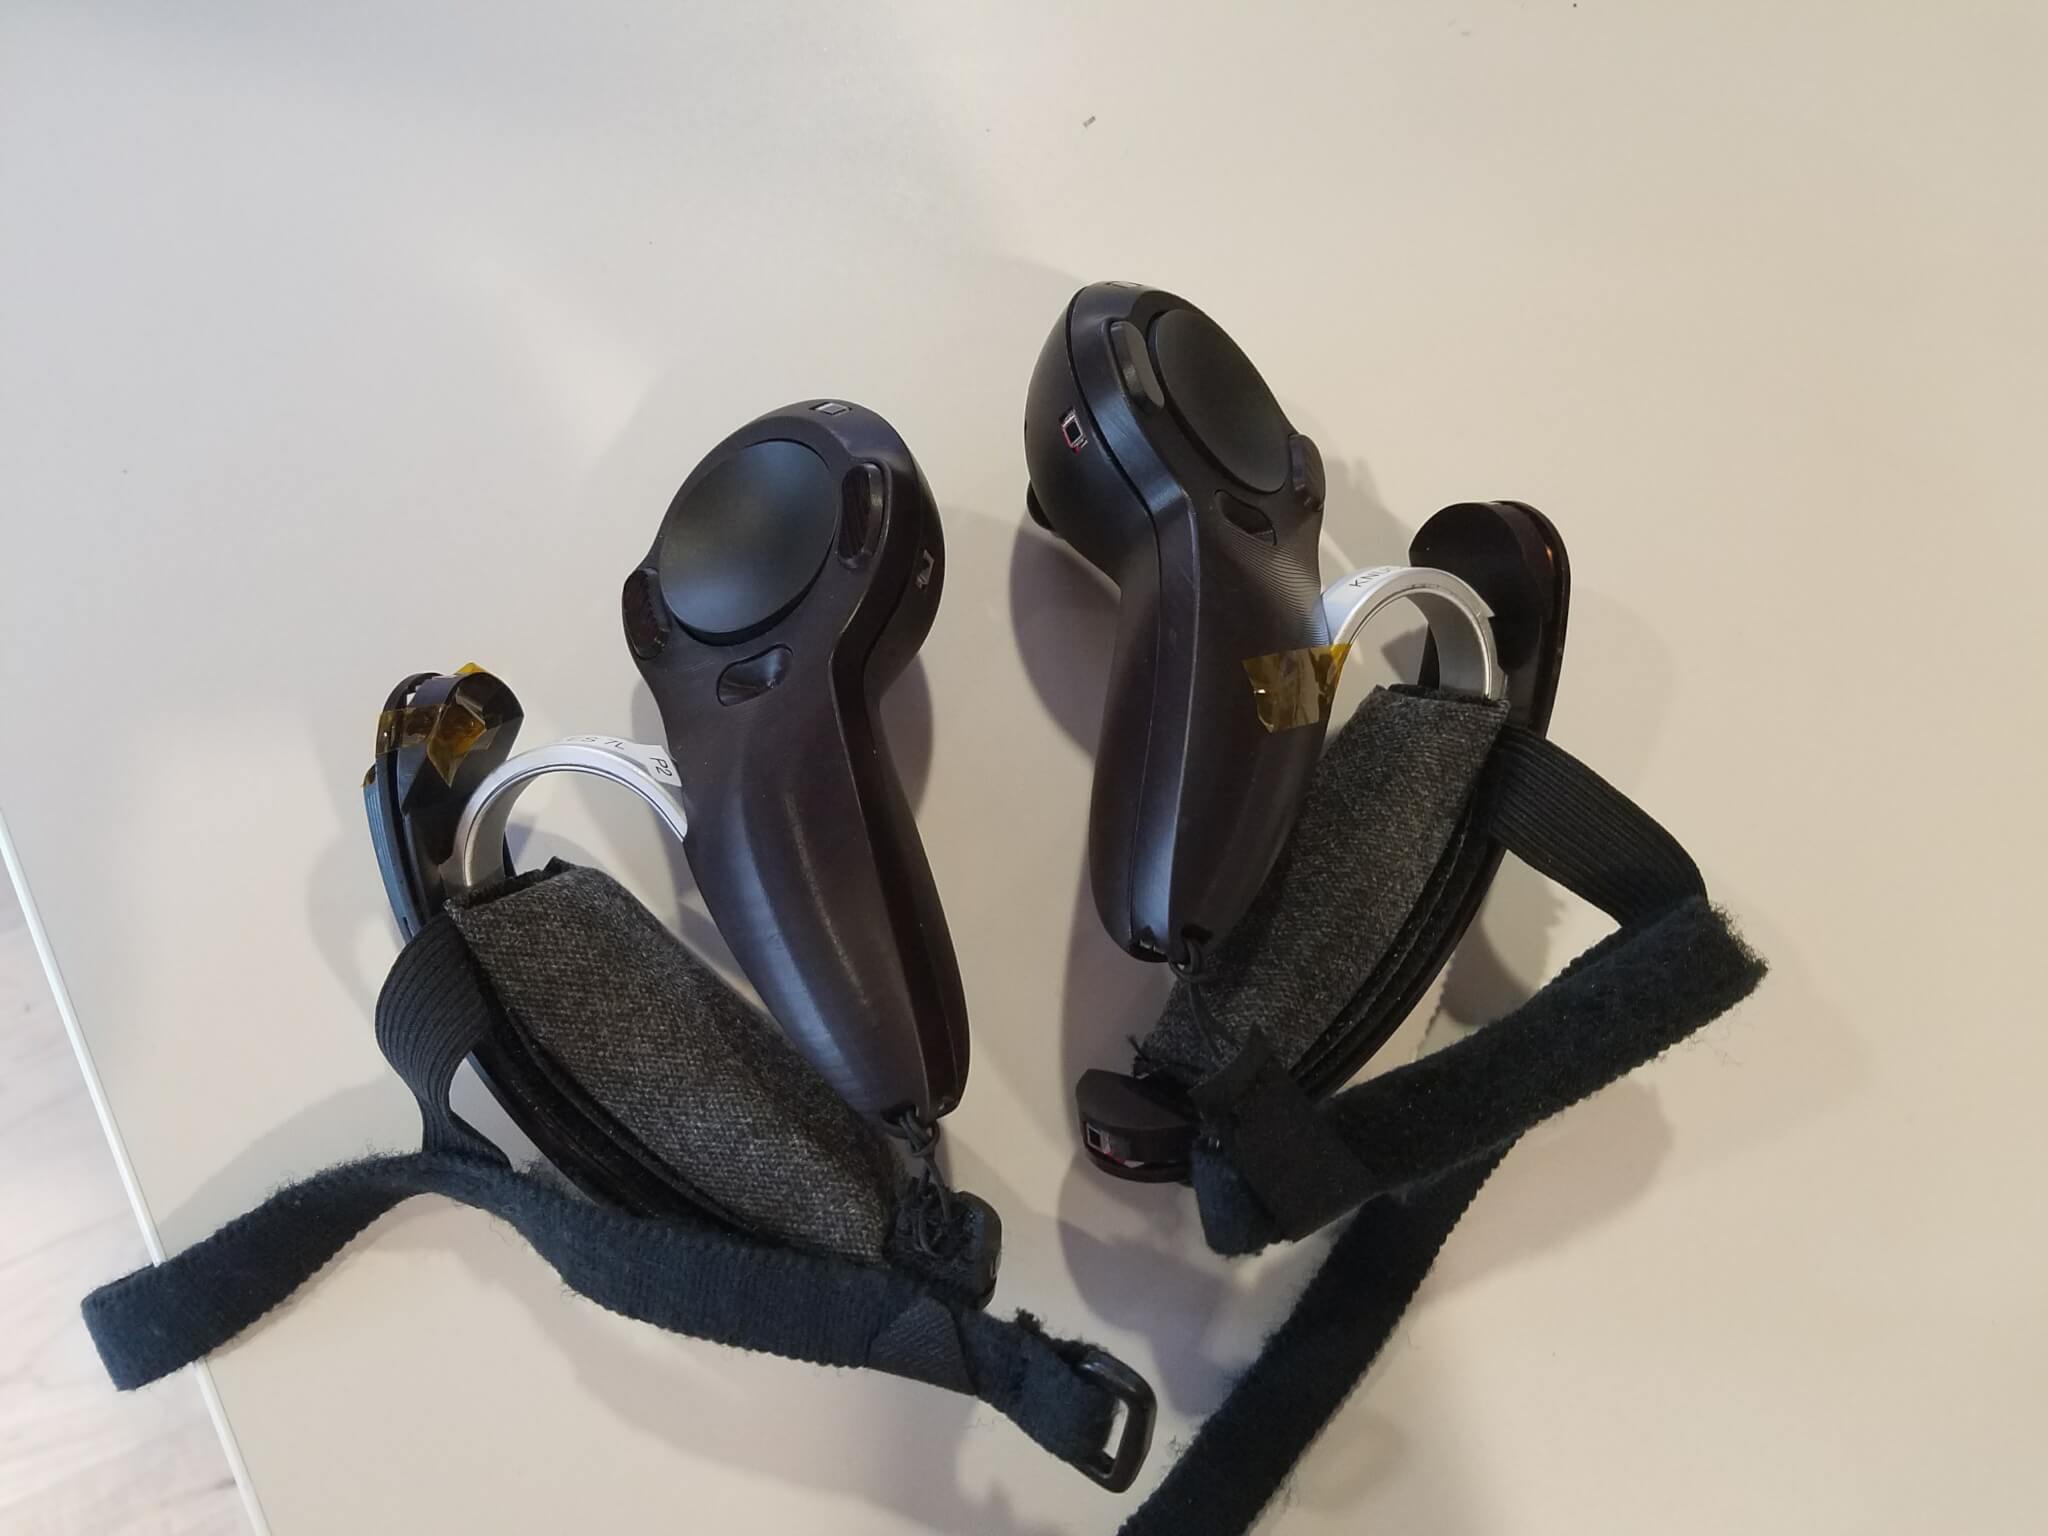 Valve's old Vive controllers with its prototype grip controllers. 